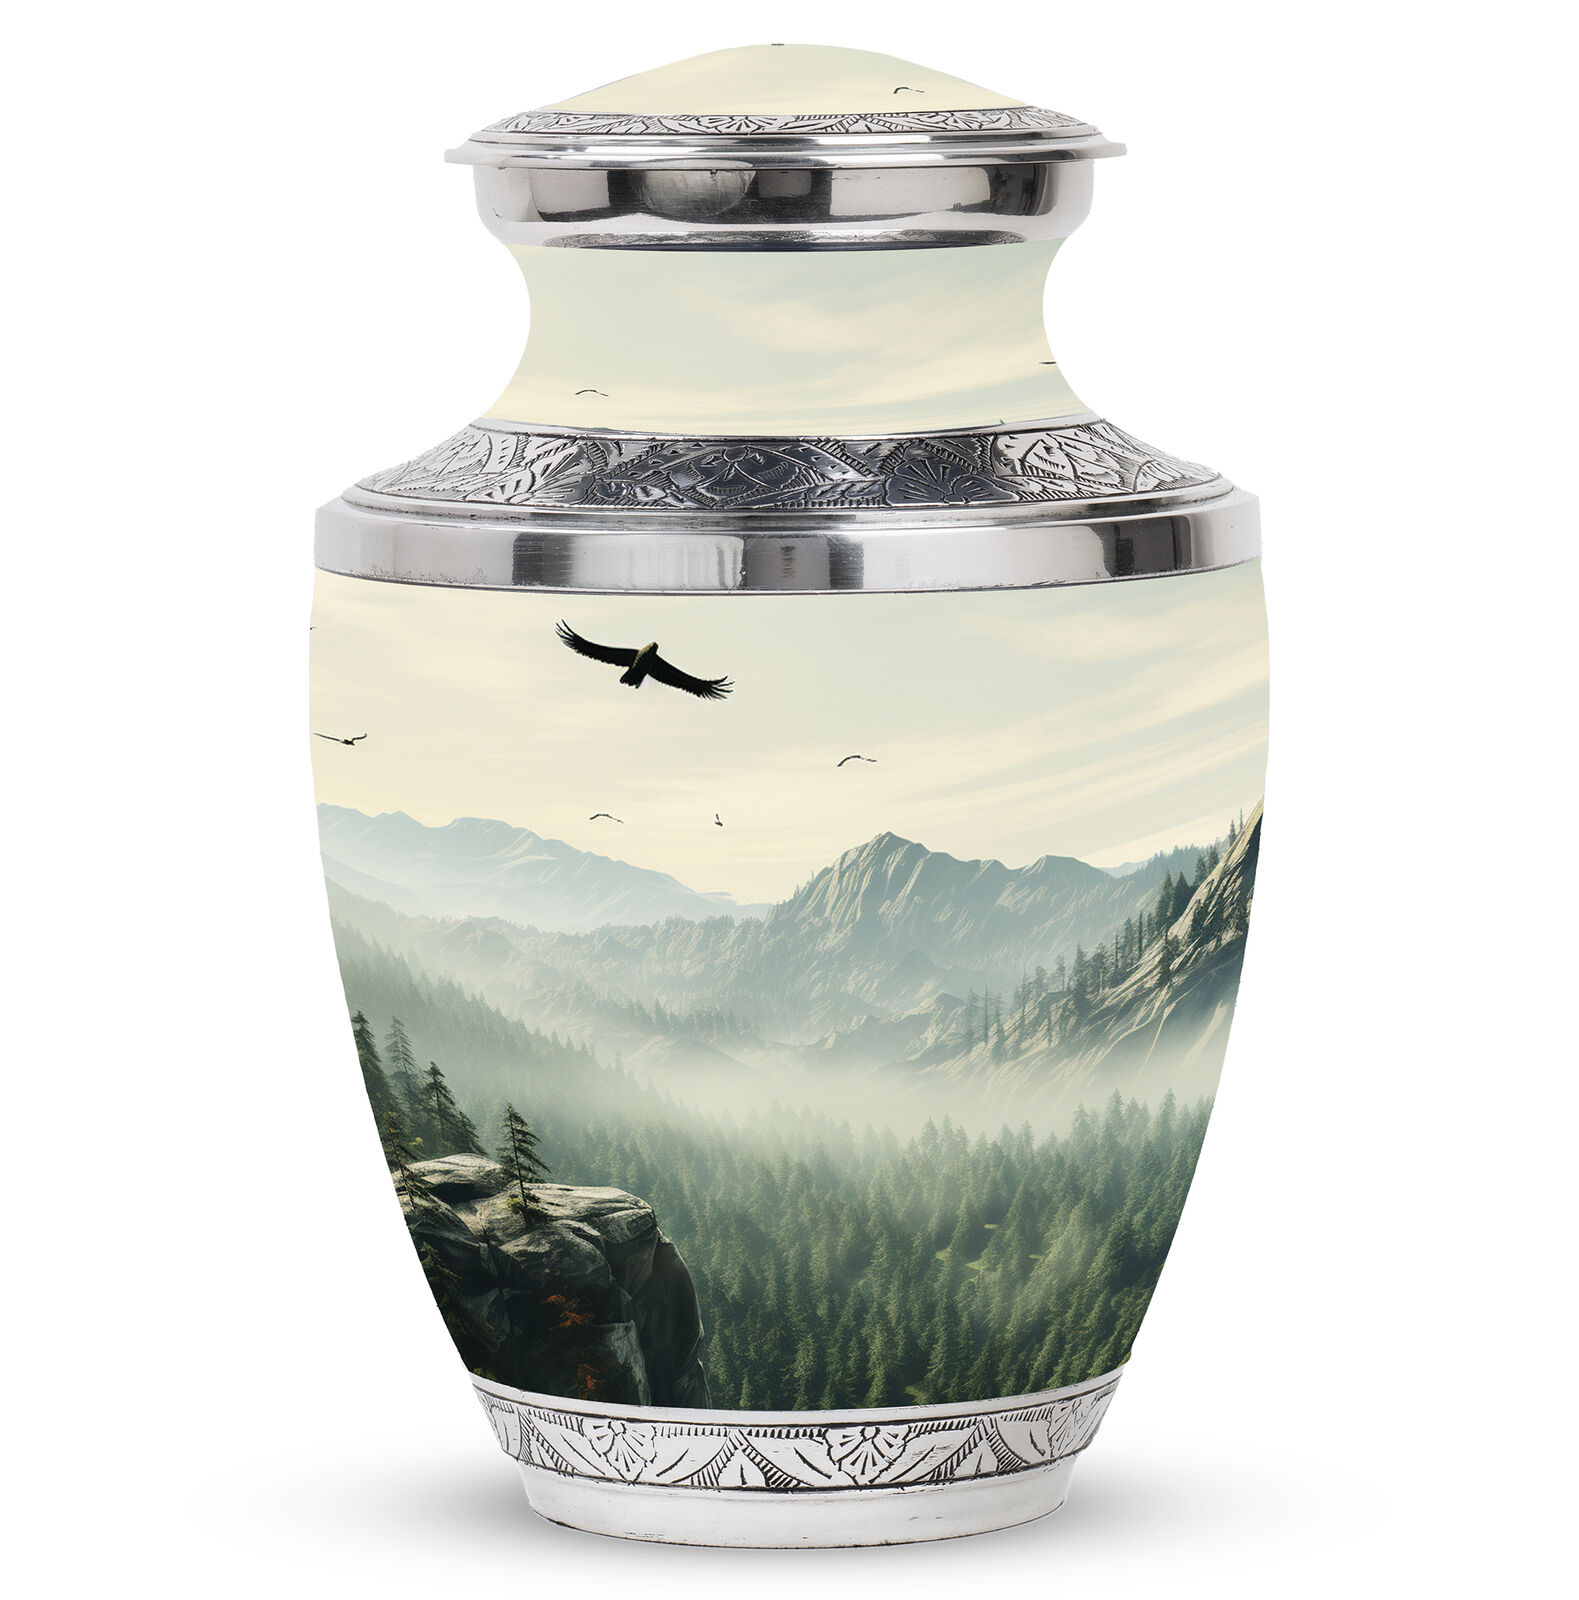 Small Urns Realistic Illustration Of Mountains And Forest (10 Inch) Large Urn